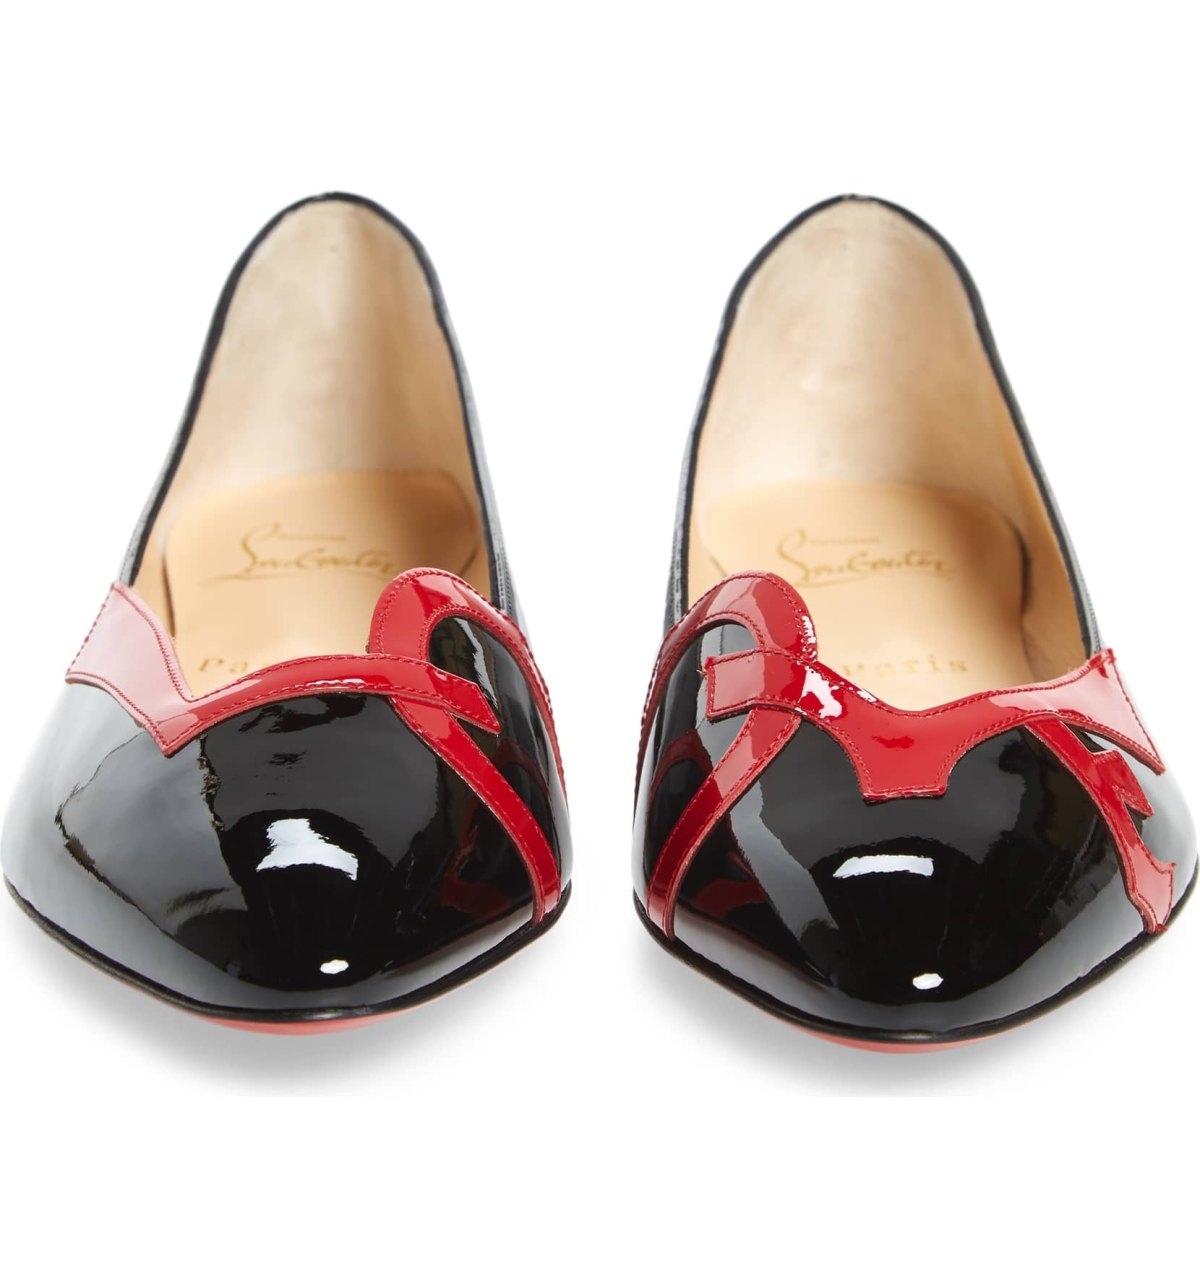 These Christian Louboutin Ballet Flats Have a Romantic Message